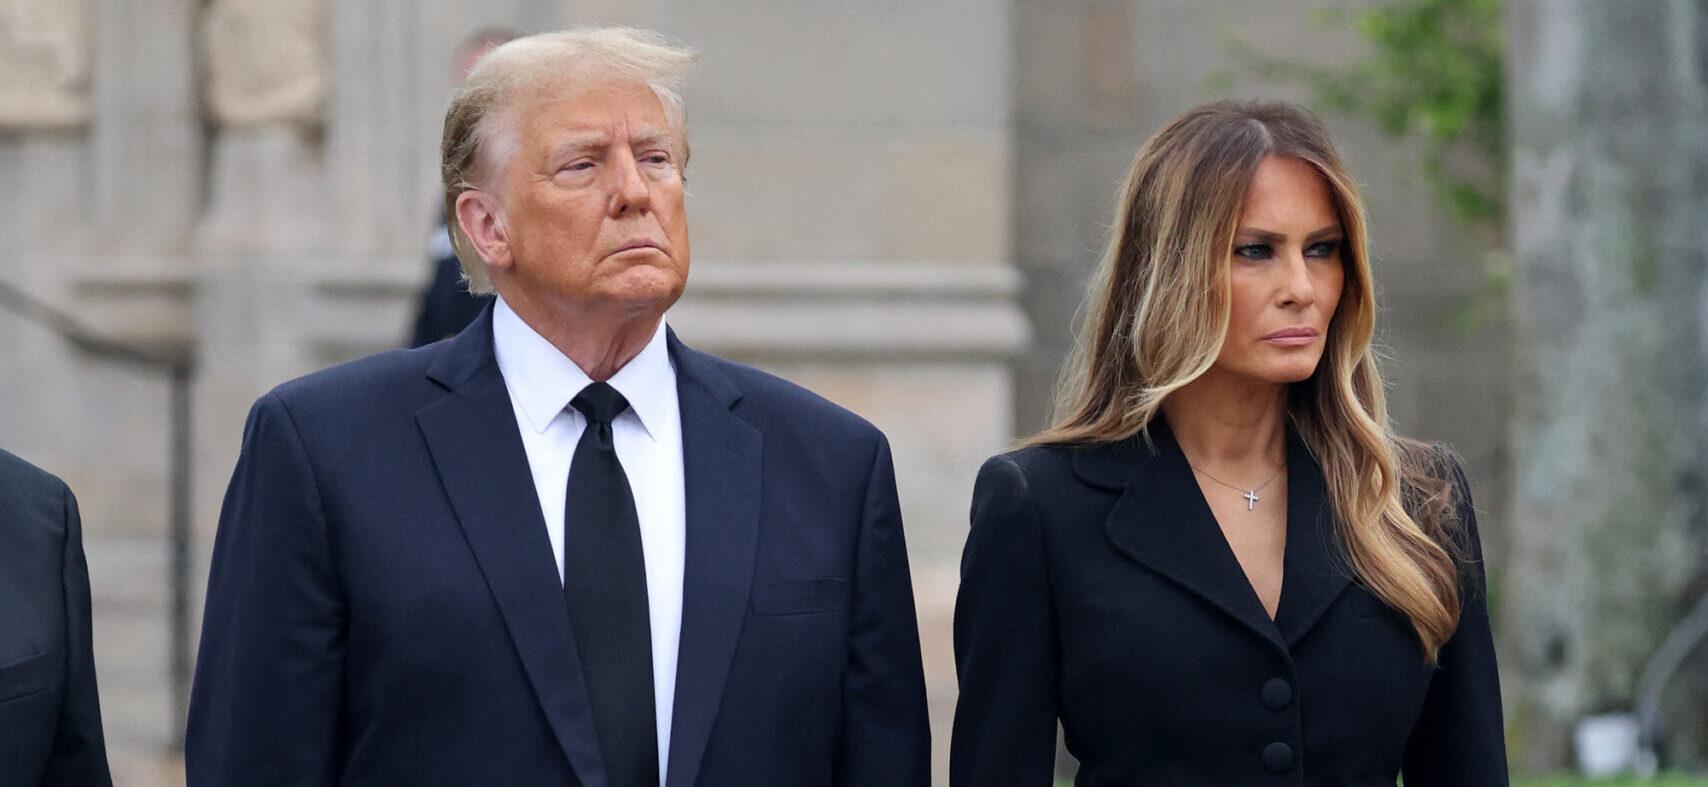 Melania Trump’s Time As First Lady Was Allegedly Spent Discussing Prenup With Her Lawyers